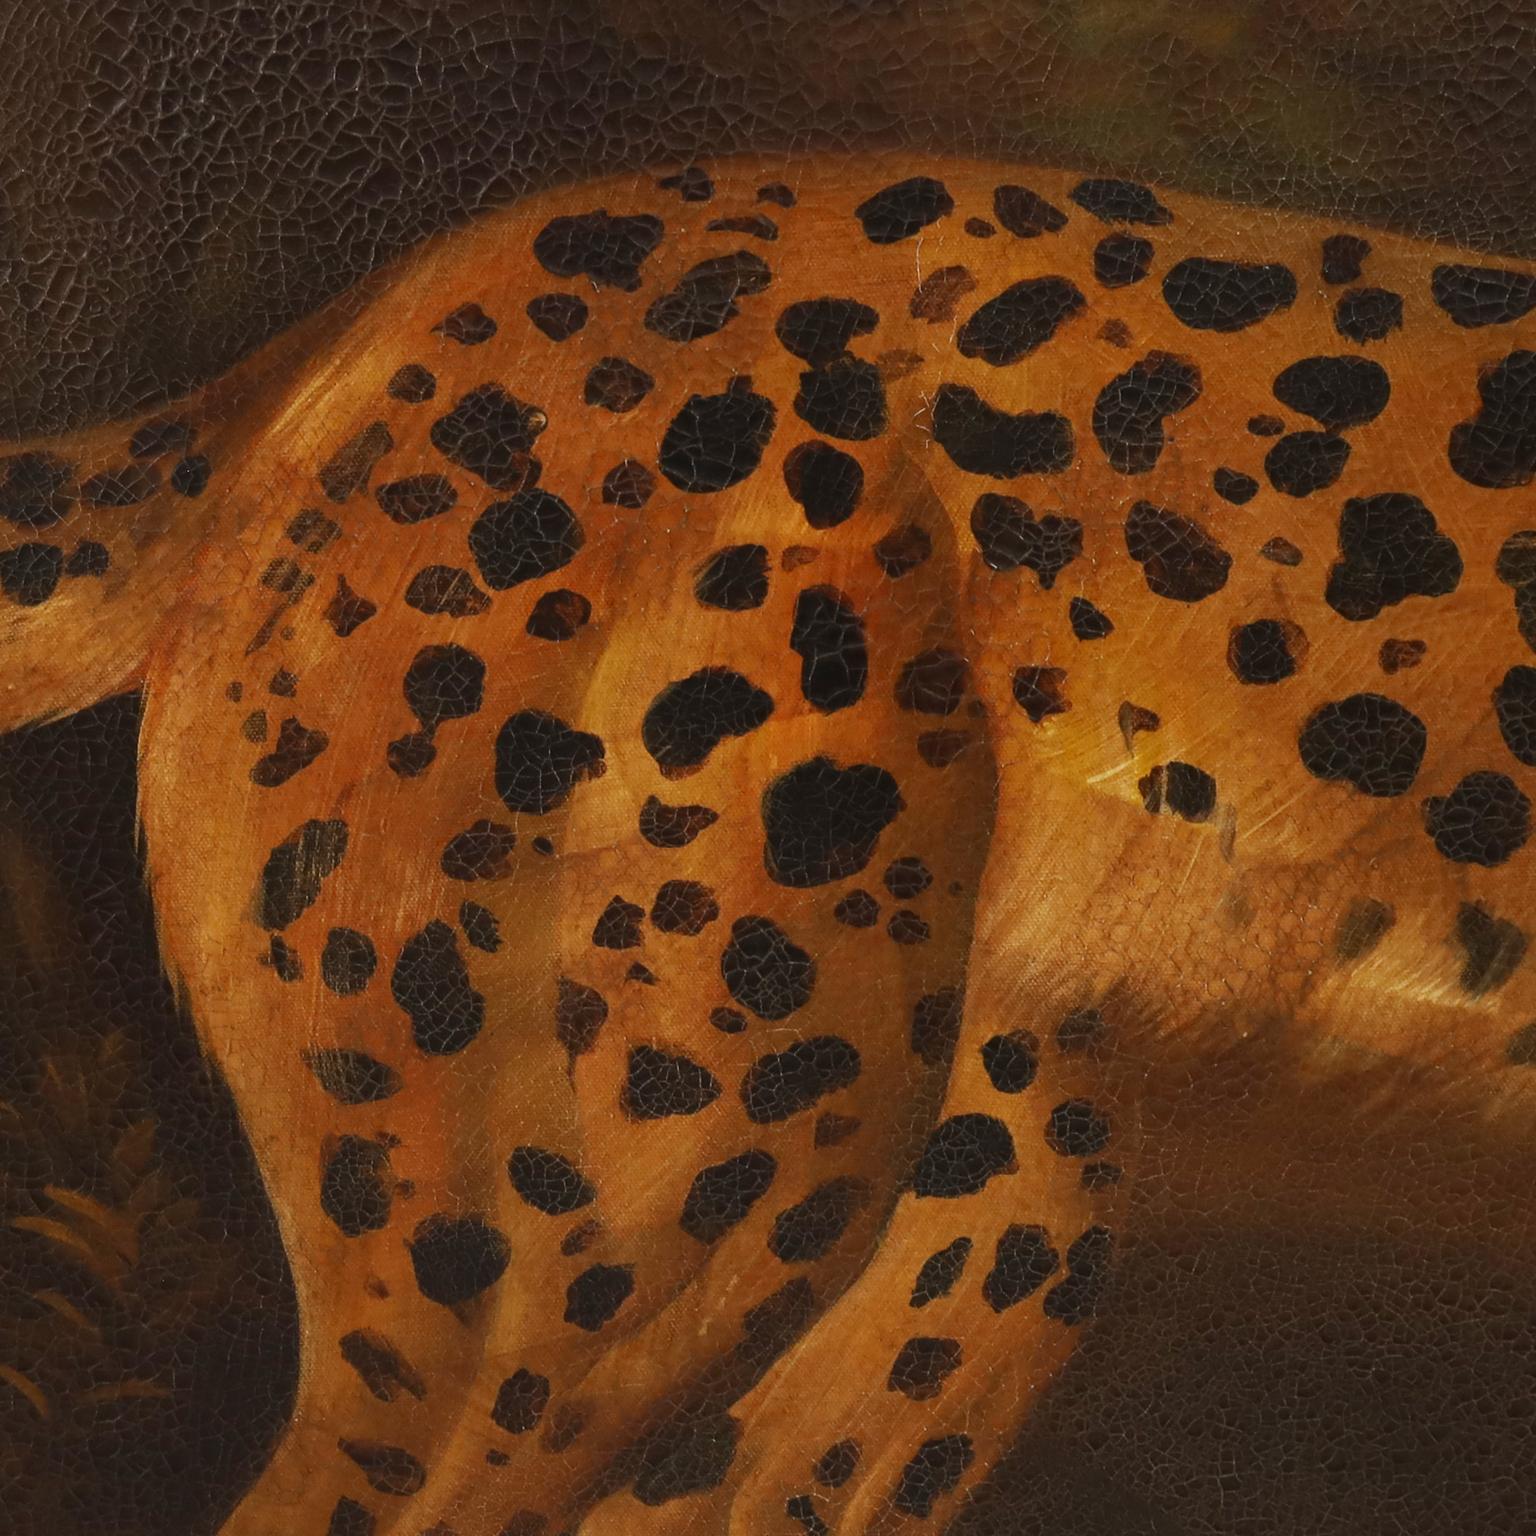 Reginald Baxter Vintage Oil Painting on Canvas of a Cheetah or Leopard 4